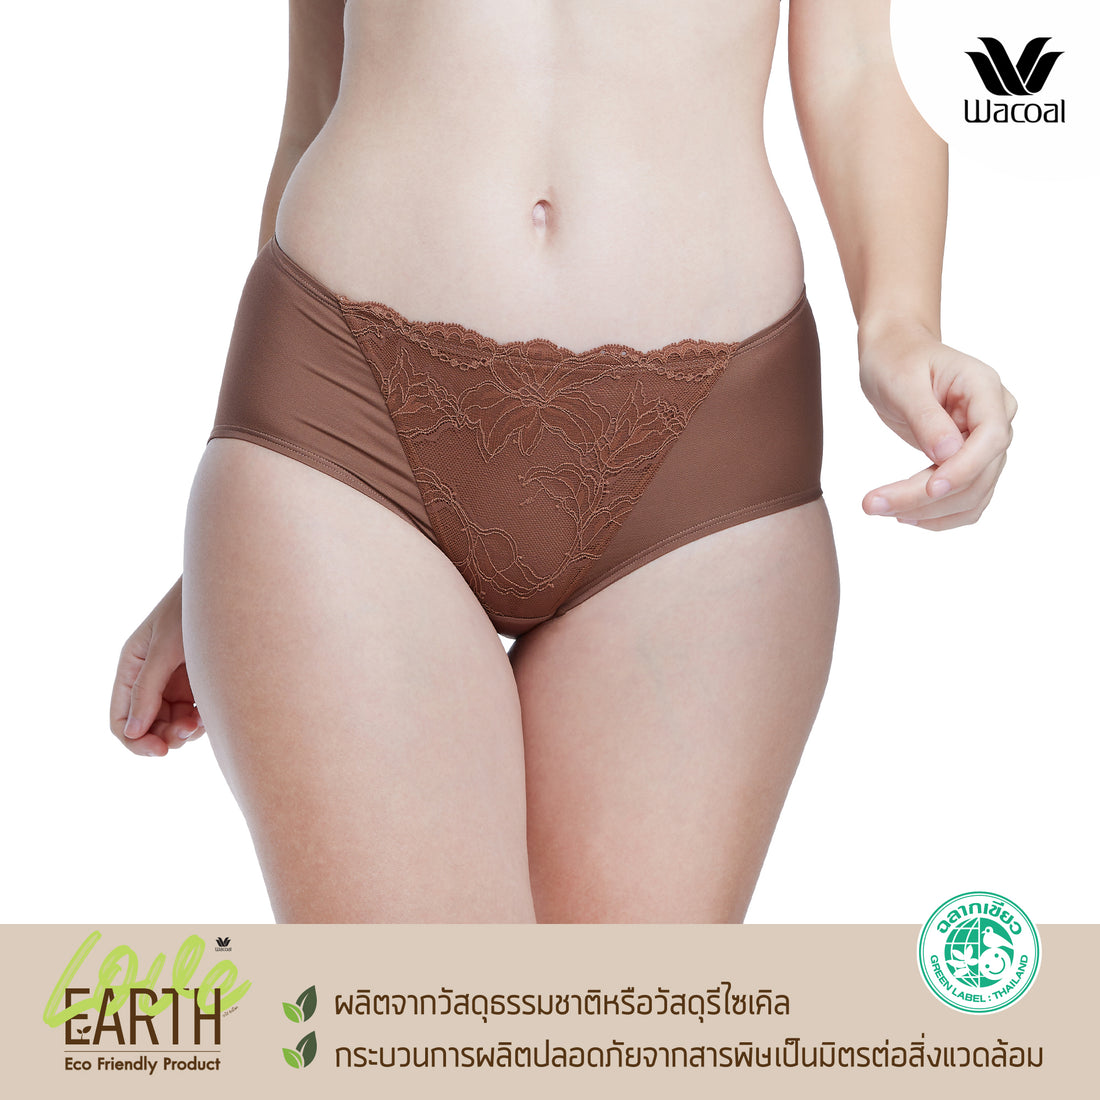 Wacoal Curve Diva, compression bra, large cup girls (bra and panties), model WB7985+MU7985, brown (BR)